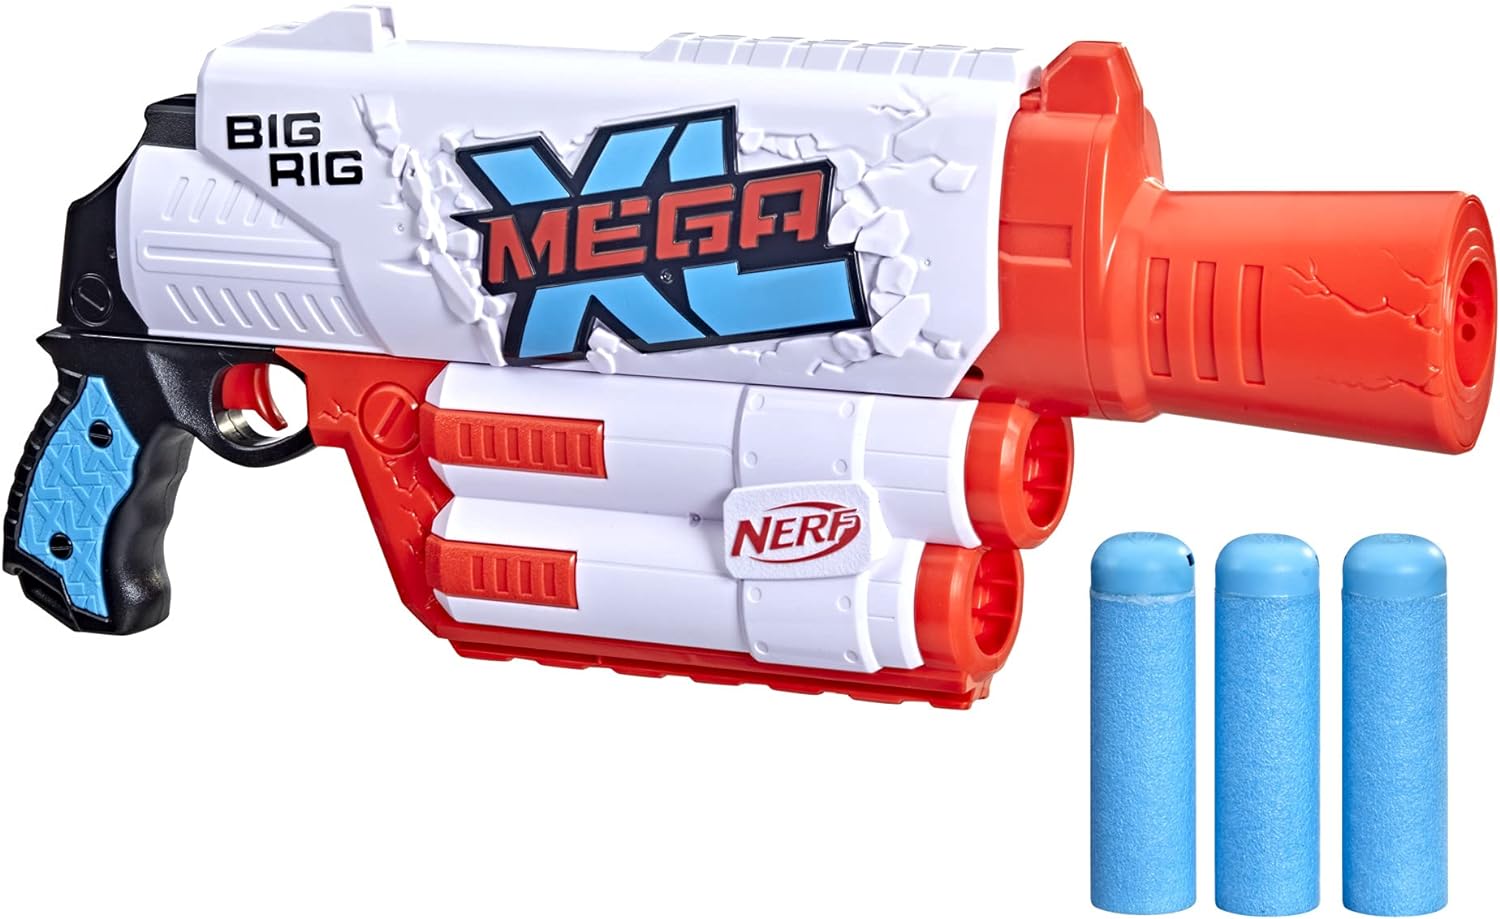 So, I am a big fan of the original MEGA Nerf Guns but wanted to try something diff. I admit I like the new style of these these MEGA darts. The only very small gripe is just an aesthetic one. I hope they come out with a version w/o the cartoonish lettering.....but....its the performance that counts for me. Since the darts are larger the wont go as far as the regular Mega darts...but that is understandable. They do hit with a satisfying thud overall so that is a plus for me. The overlarge size is